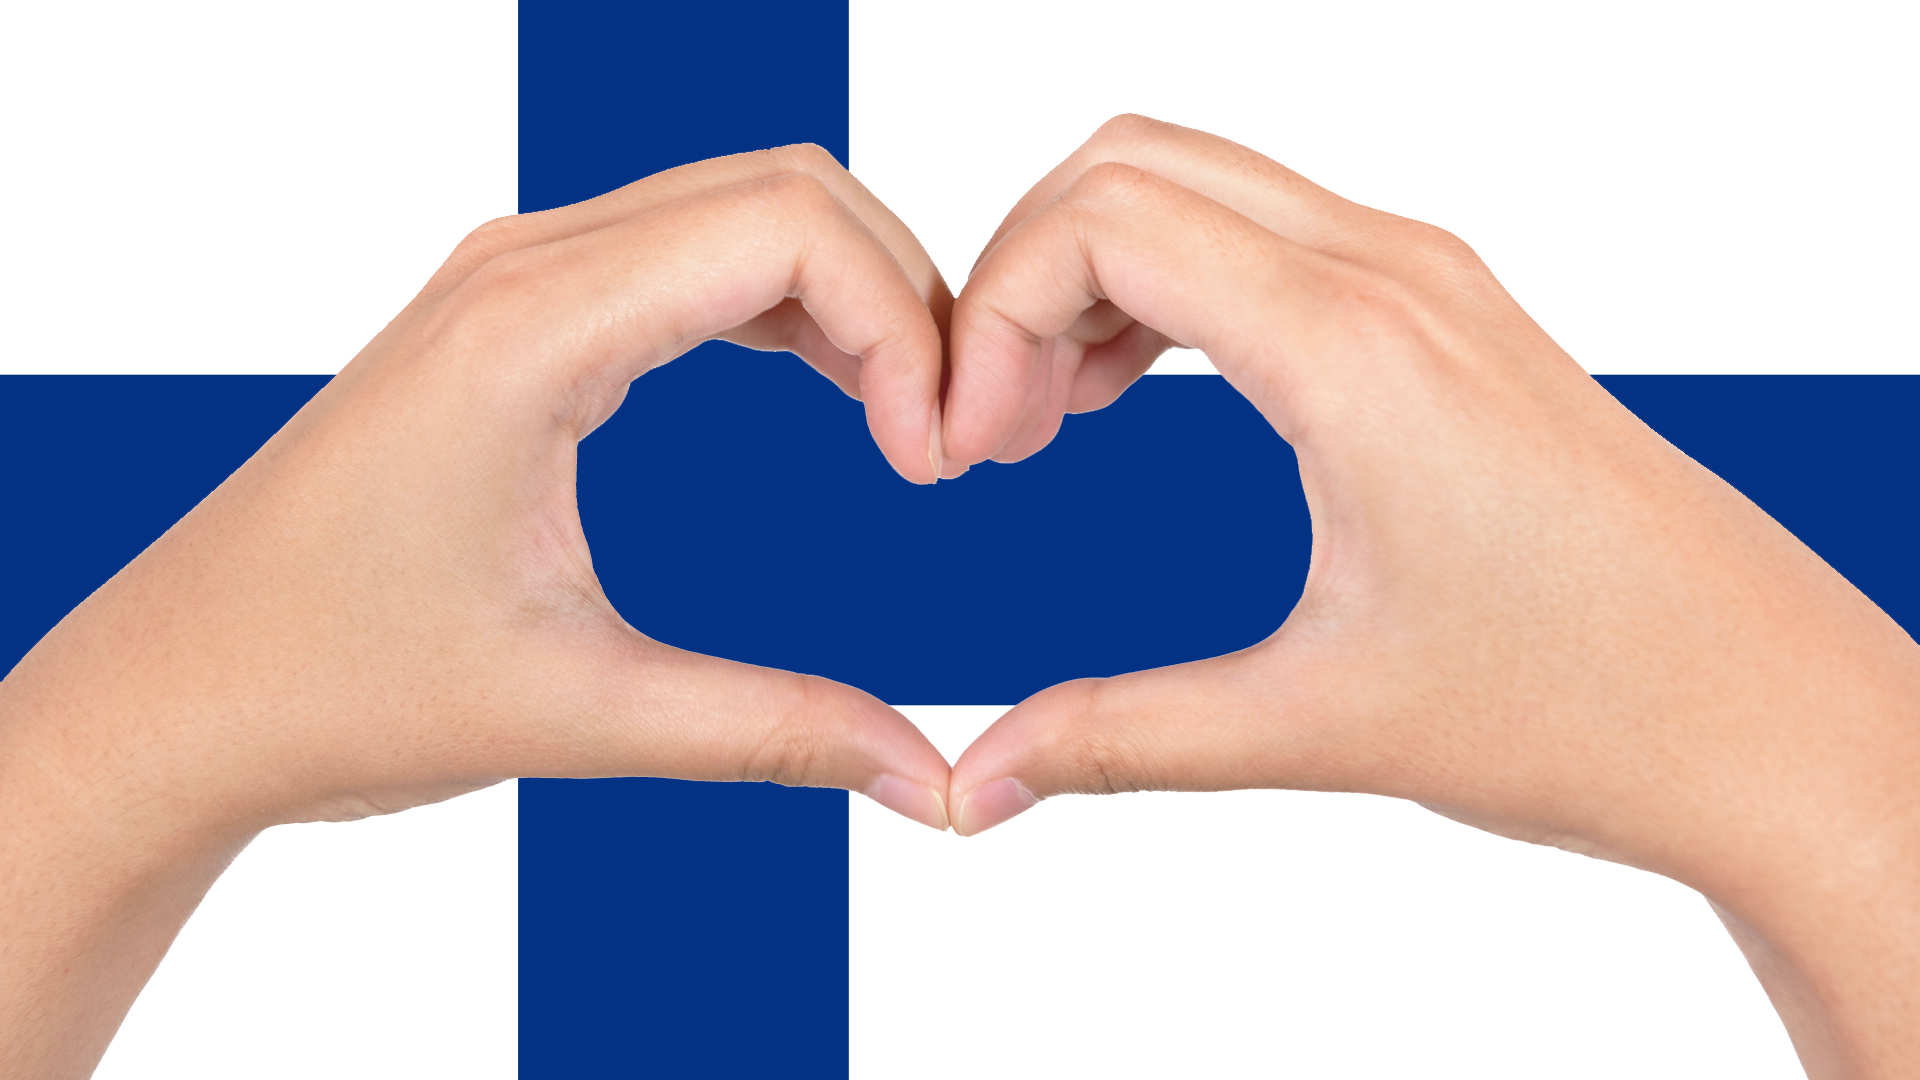 A Finnish flag and a pair of hands making a heart shape